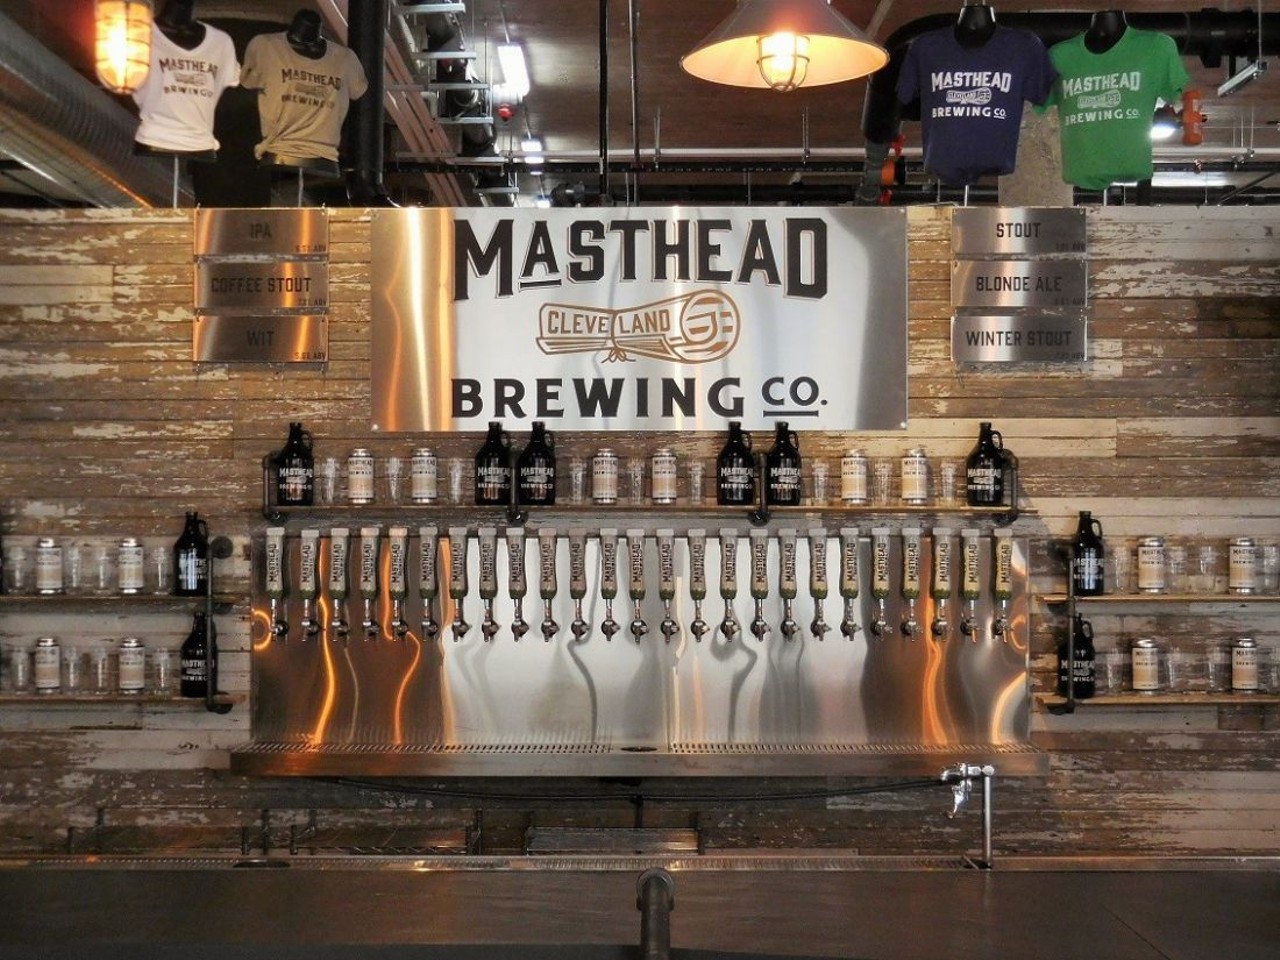  Masthead Brewing Company
1261 Superior Ave., Cleveland
If it's true (please let it be true) that man can survive on a diet of just pizza and beer, then Masthead Brewing Co. has all the requirements necessary to sustain life. But more than that, this two-year-old brewery has injected a much-needed jolt of life into an area of downtown Cleveland that desperately needed it.
Photo by Douglas Trattner